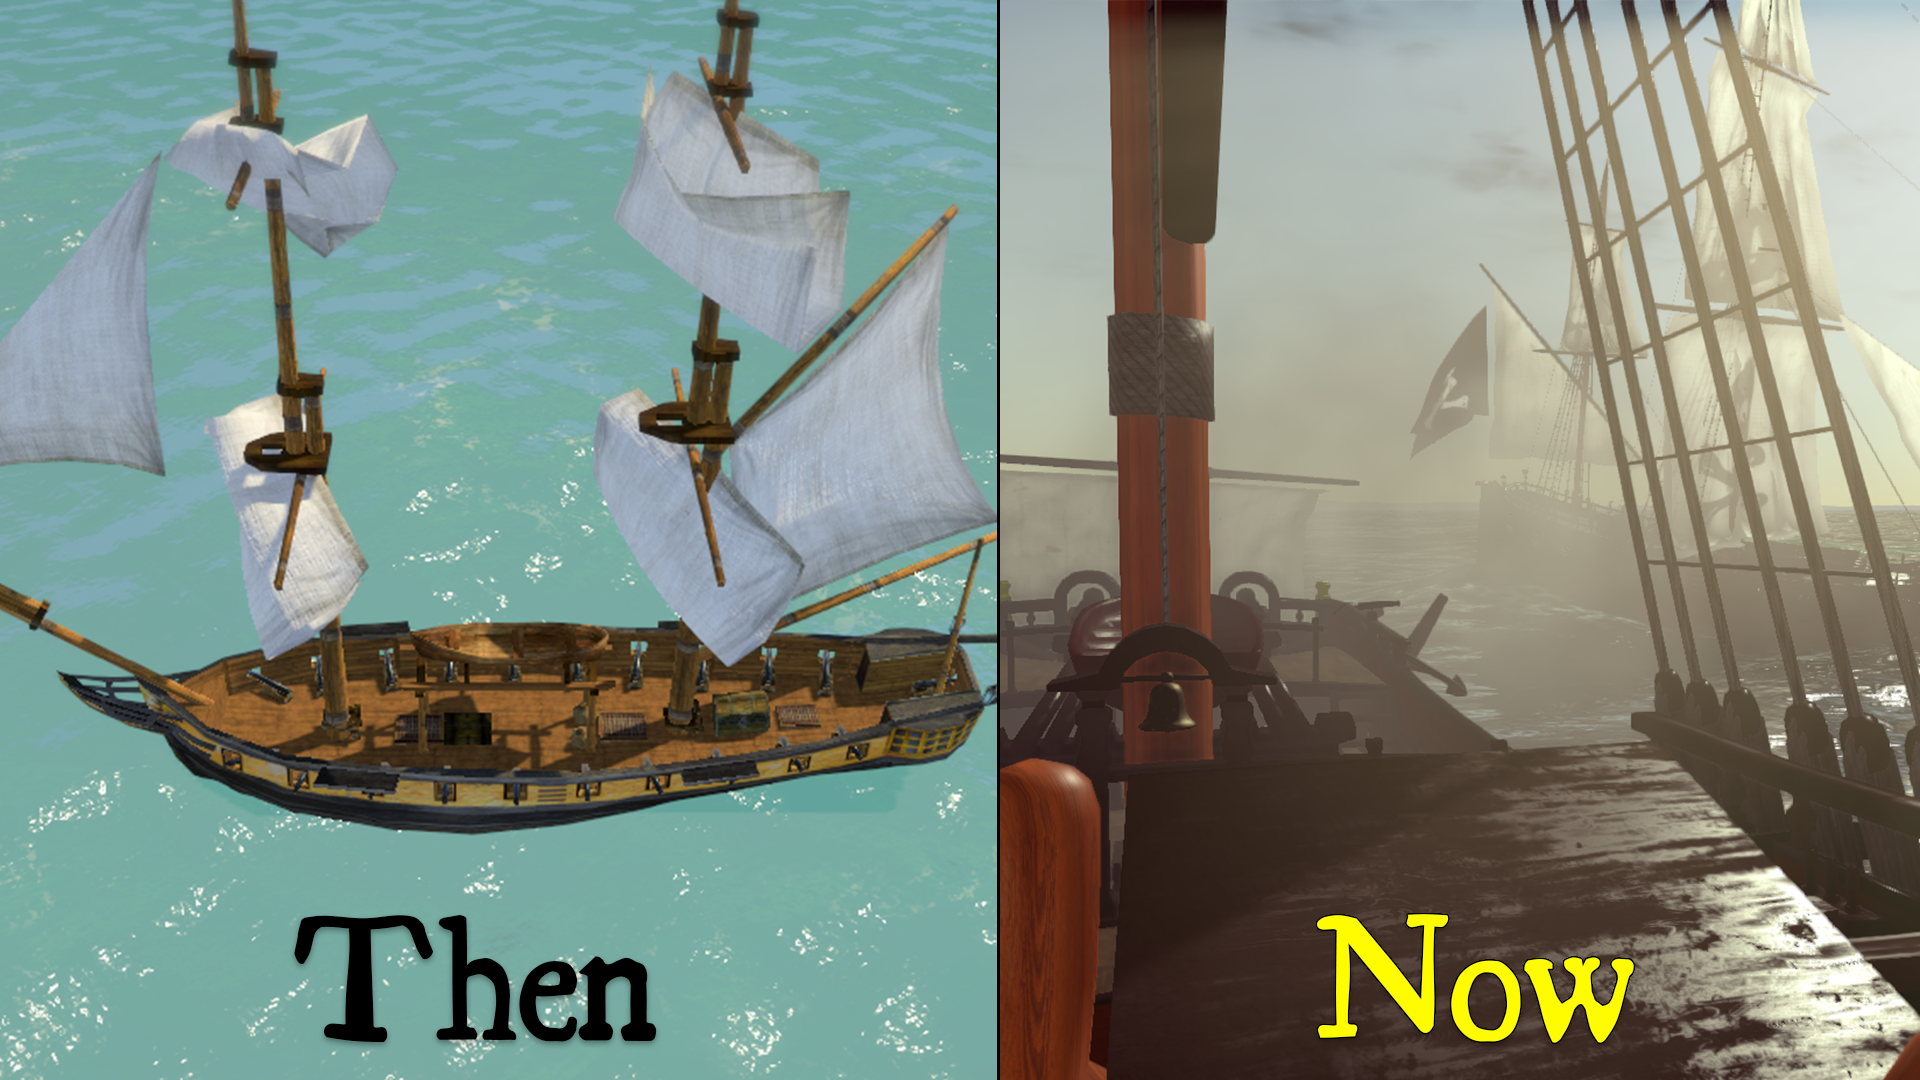 then_and_now_2 Naval Battle Game Comes to Life - End of Year Summary